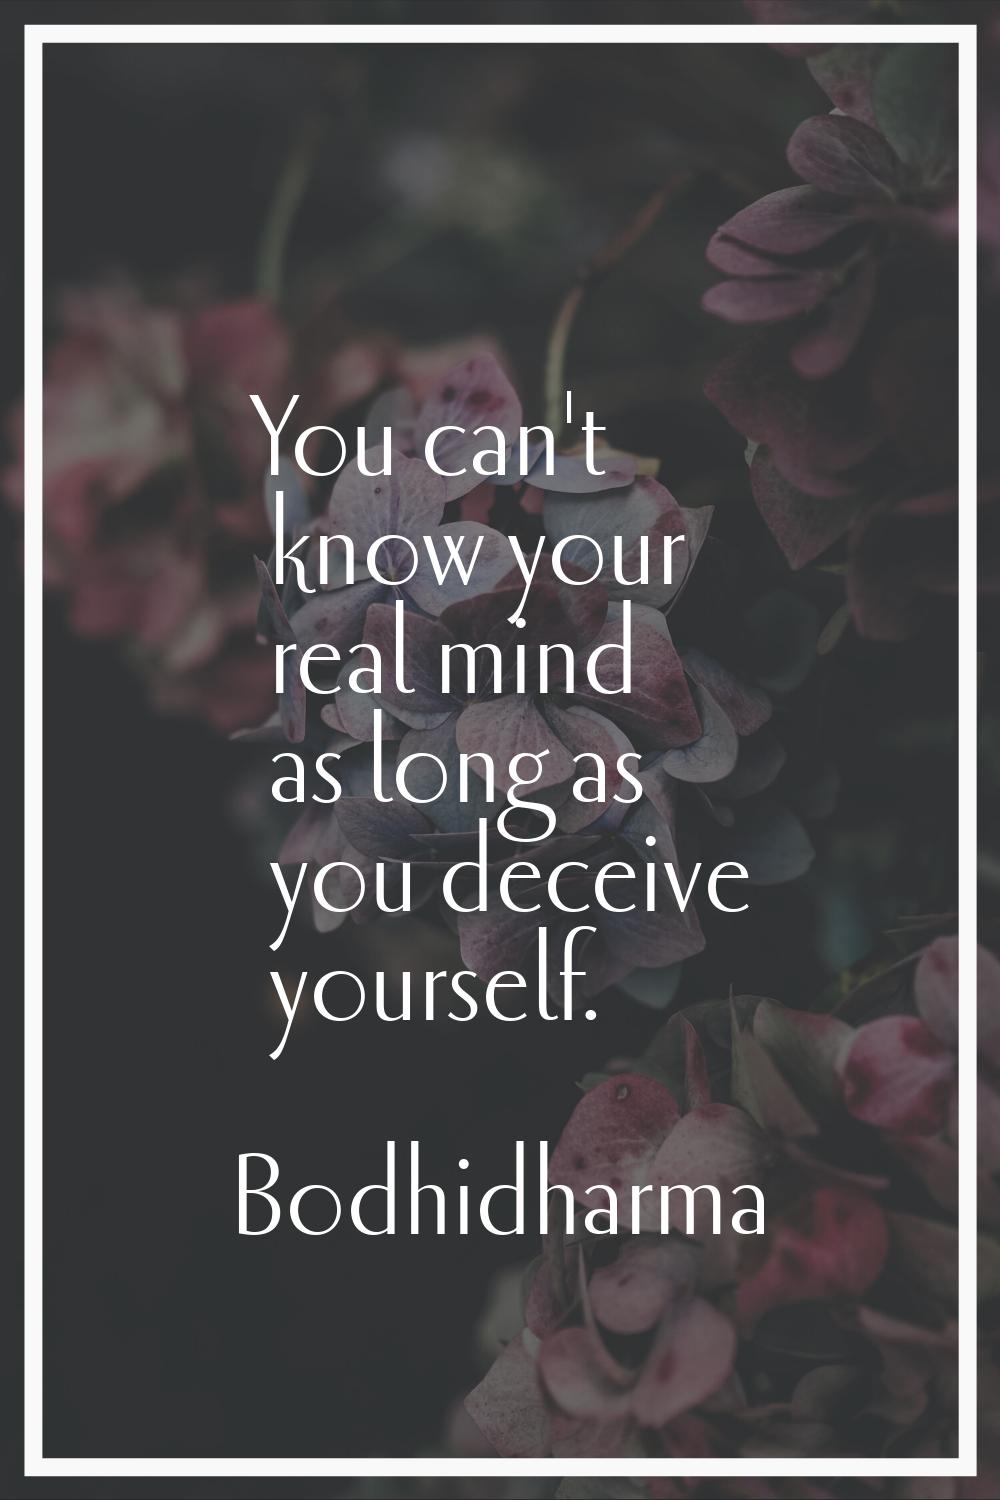 You can't know your real mind as long as you deceive yourself.